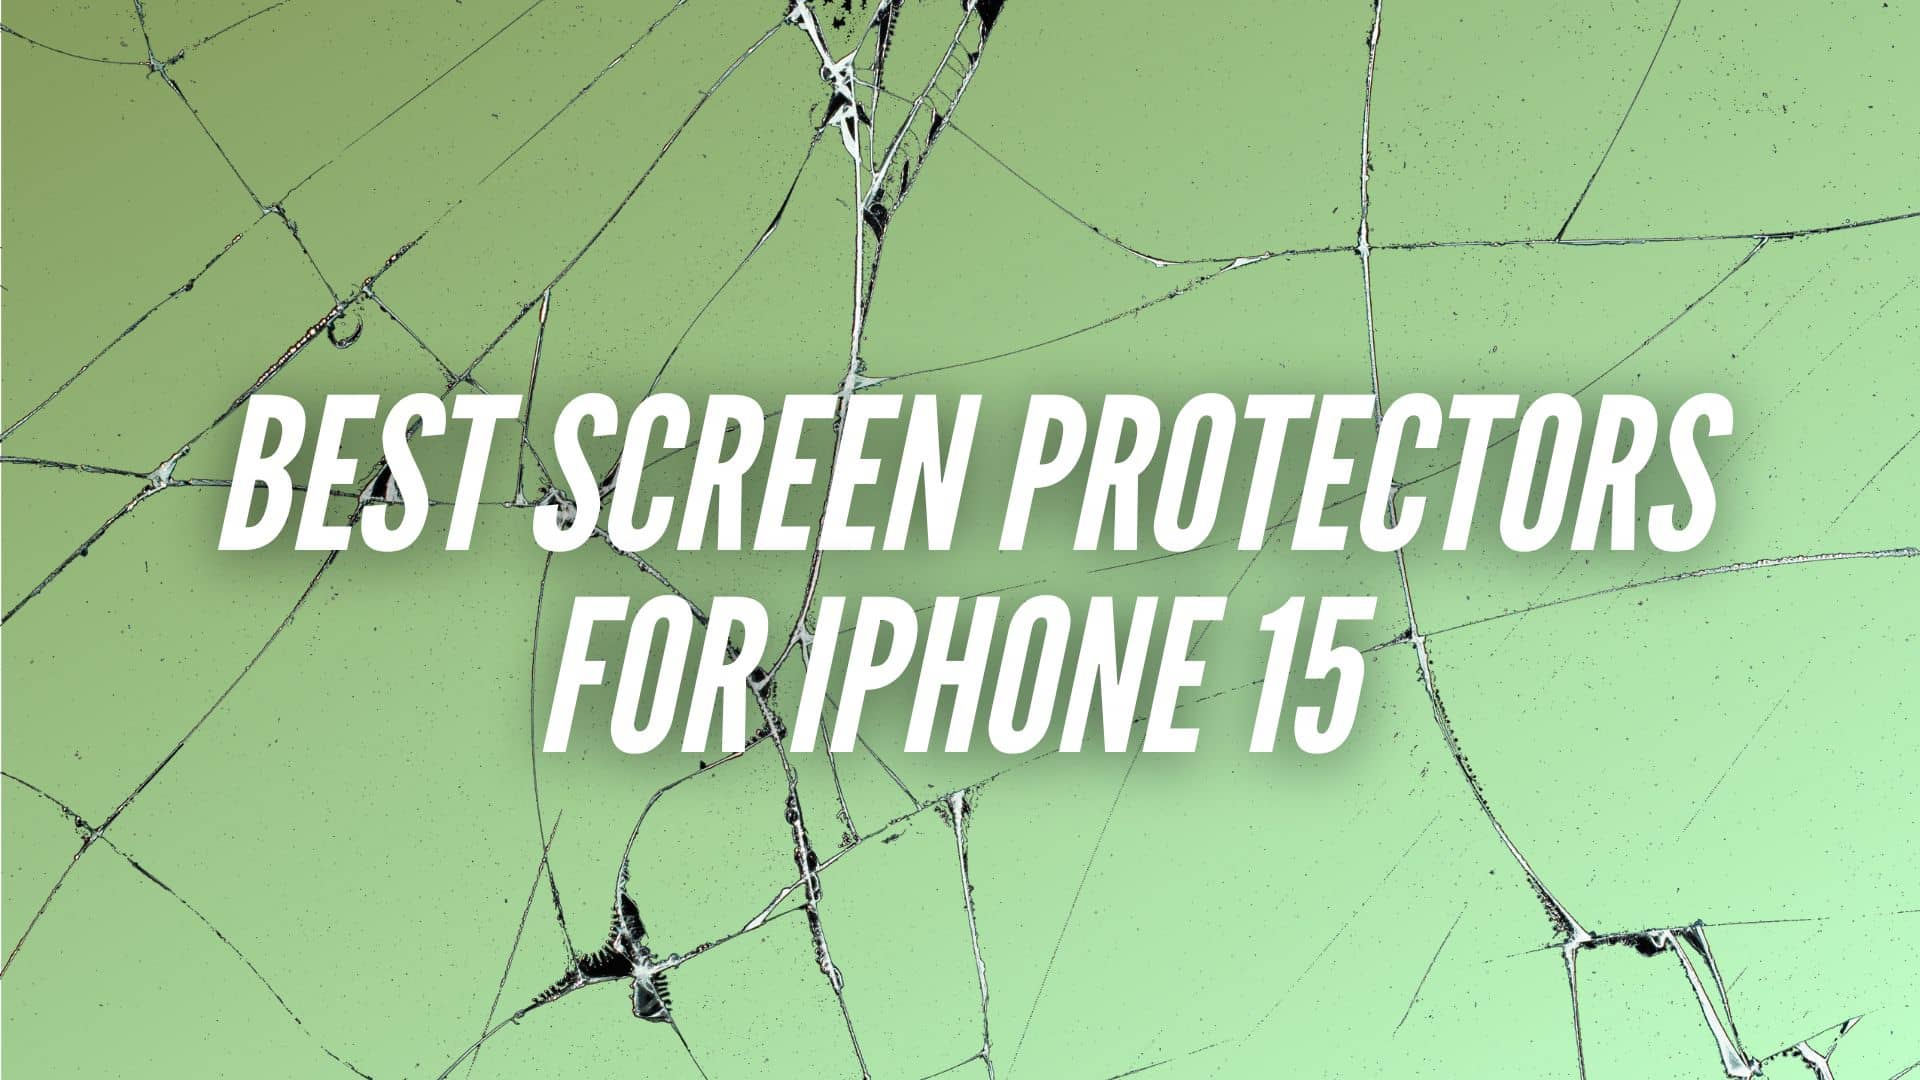 Best Screen Protectors for iPhone 15